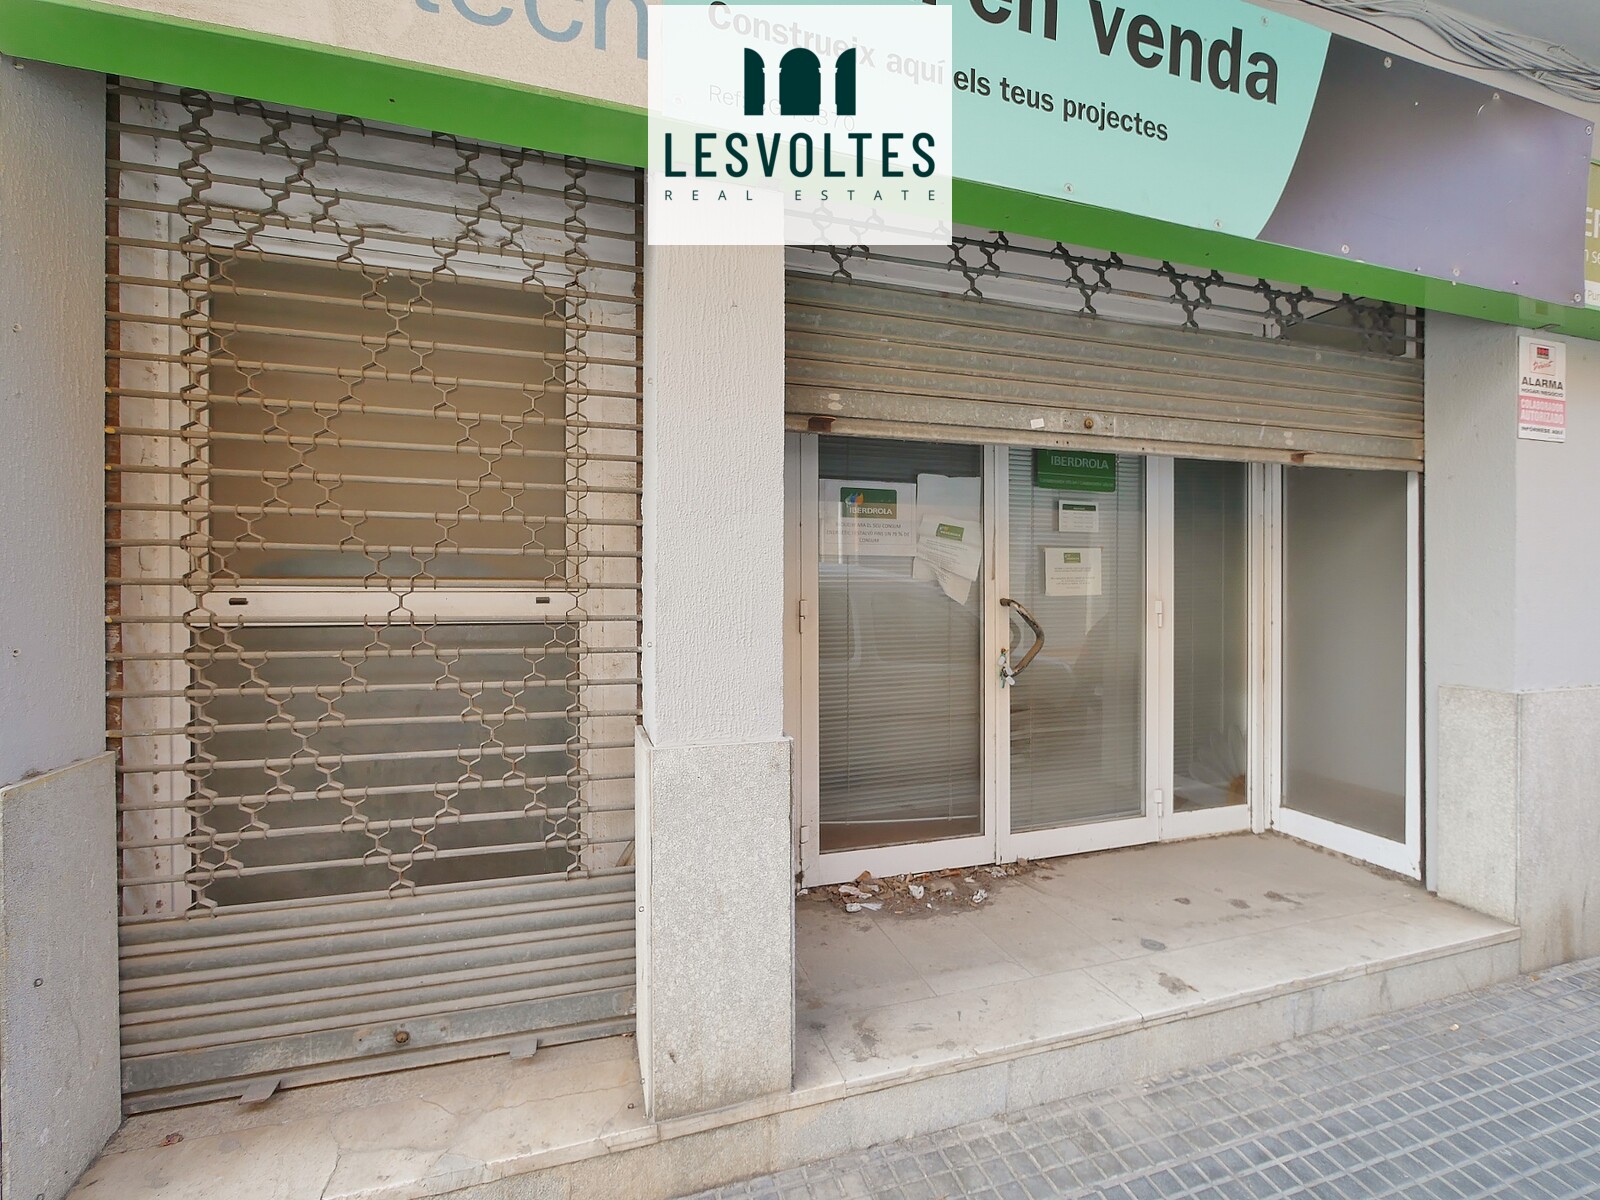 COMMERCIAL SPACE OF 65 M² LOCATED IN A HIGH-TRAFFIC AREA OF PALAFRUGELL